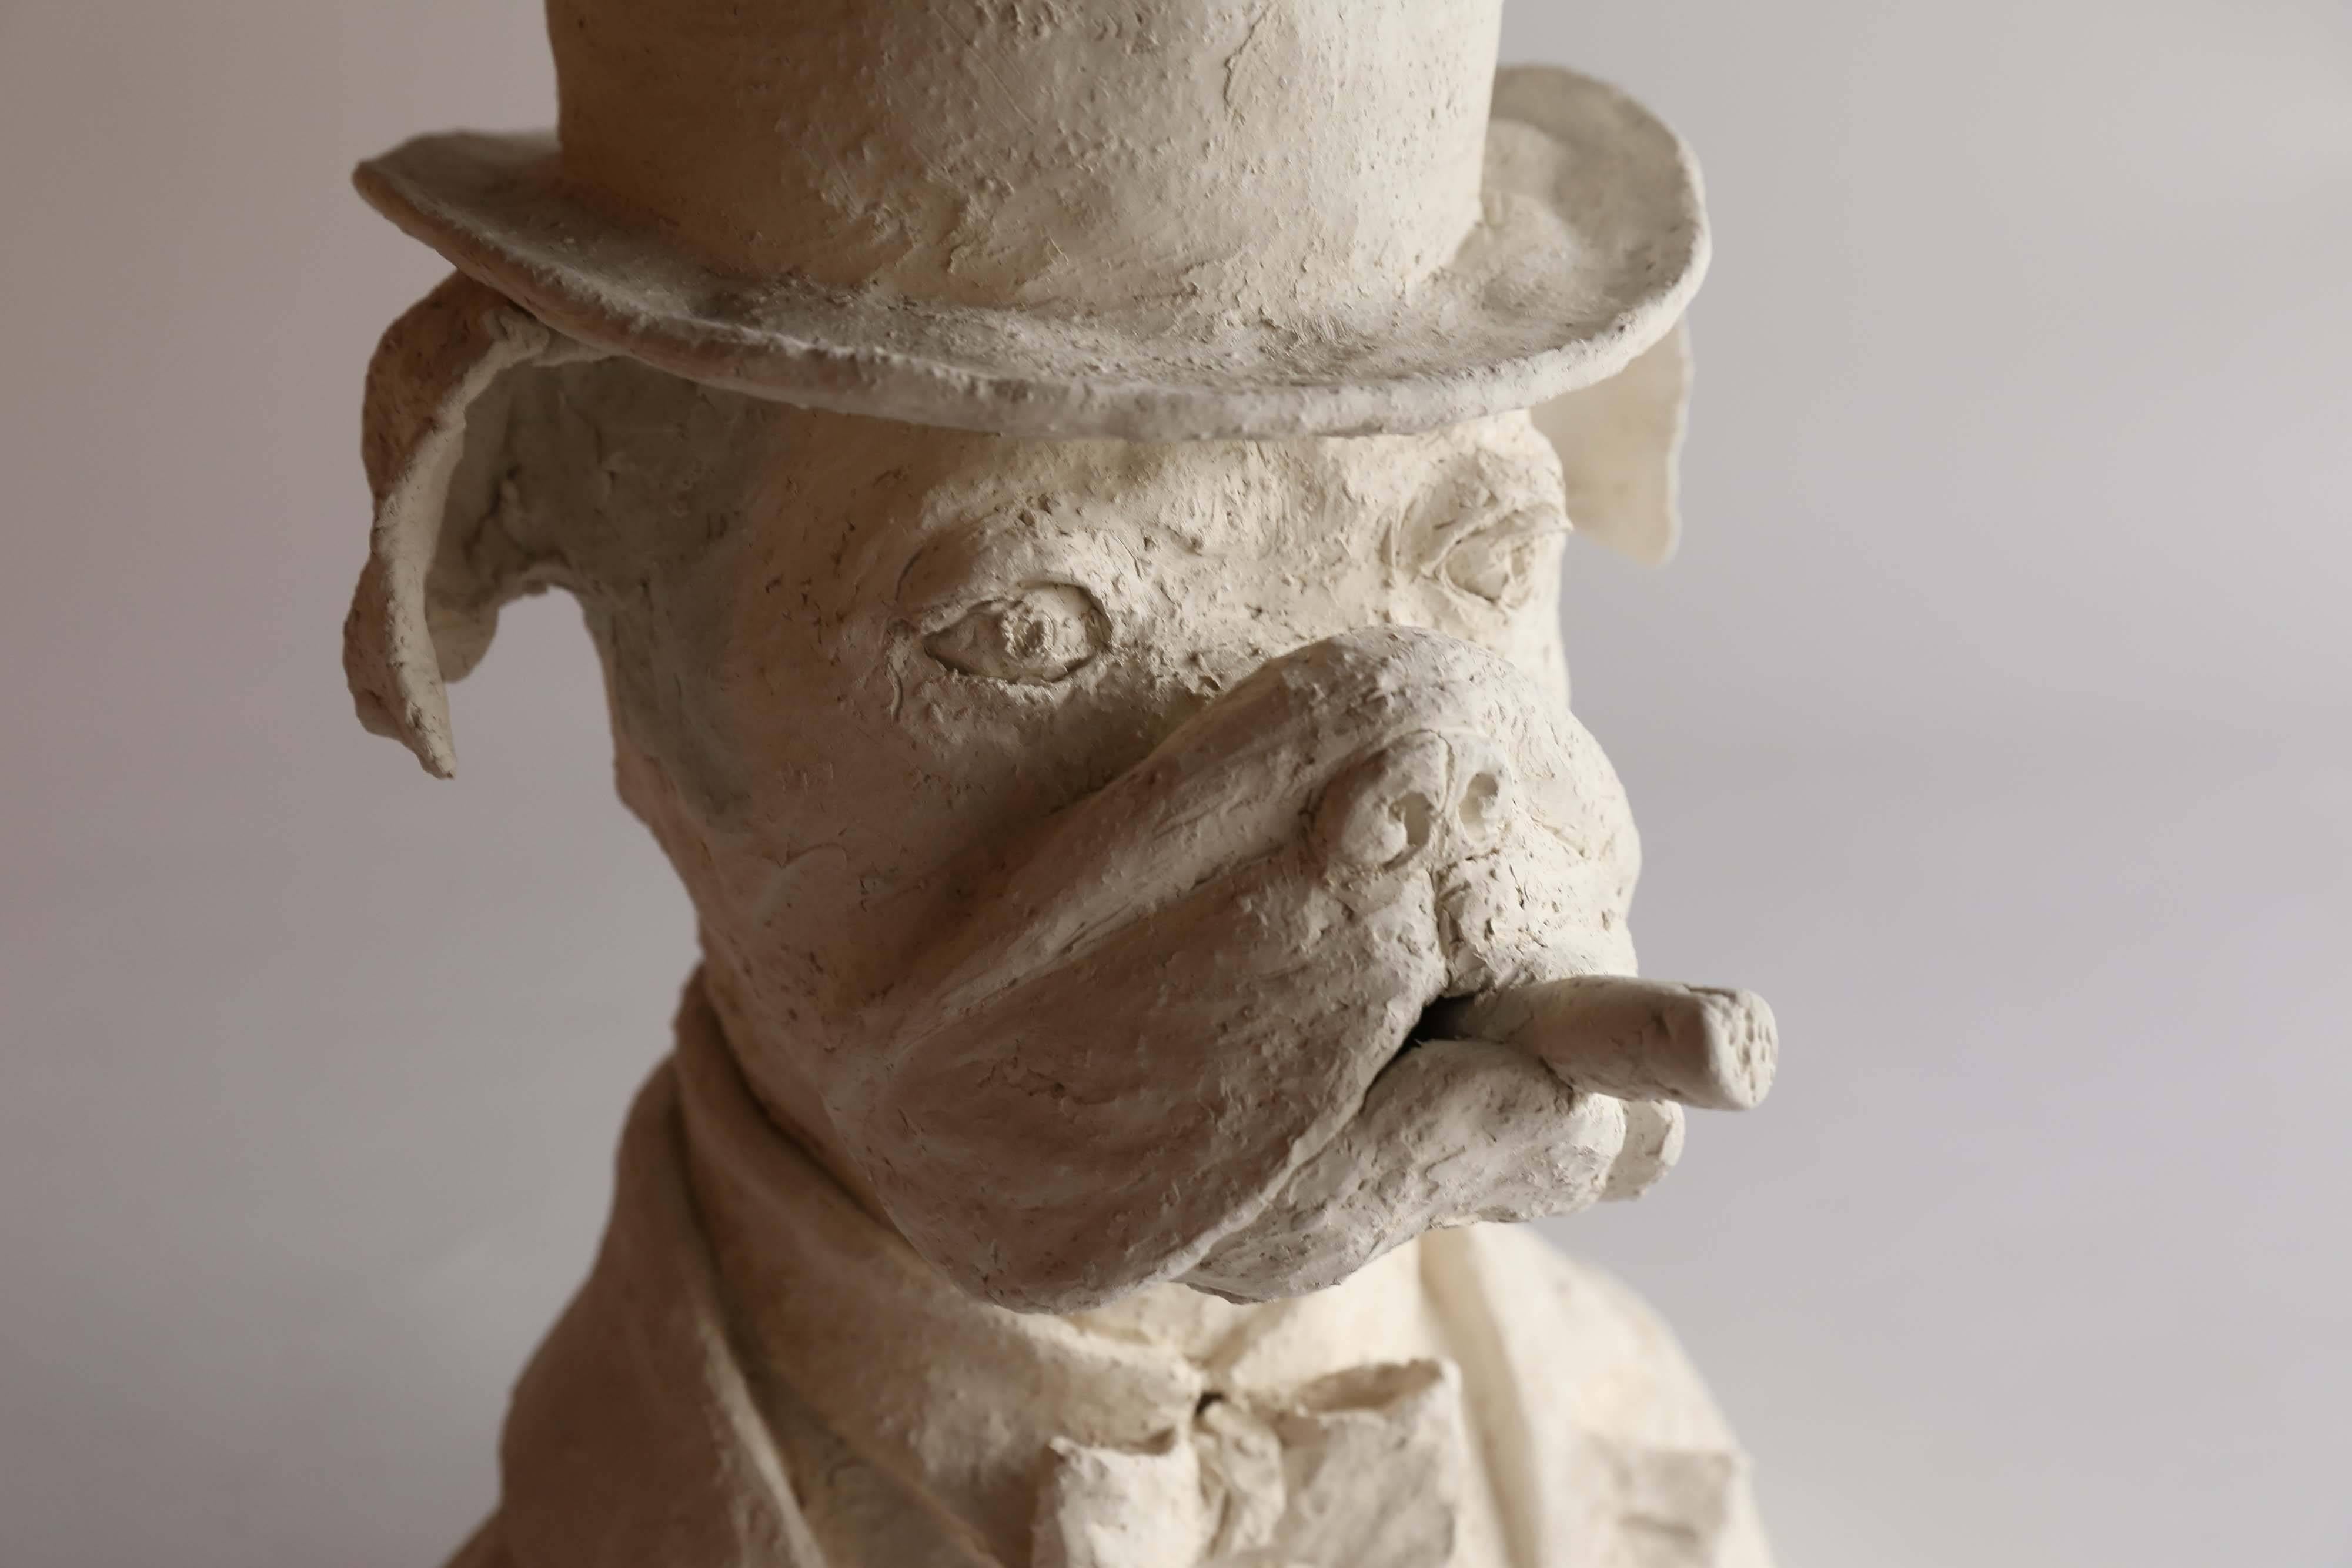 A plaster bust of a dapper bulldog. With his jaunty hat and bow tie, this dignified fellow exudes a businesslike air of confidence as he smokes his stogie. From France, the bust is signed LL.